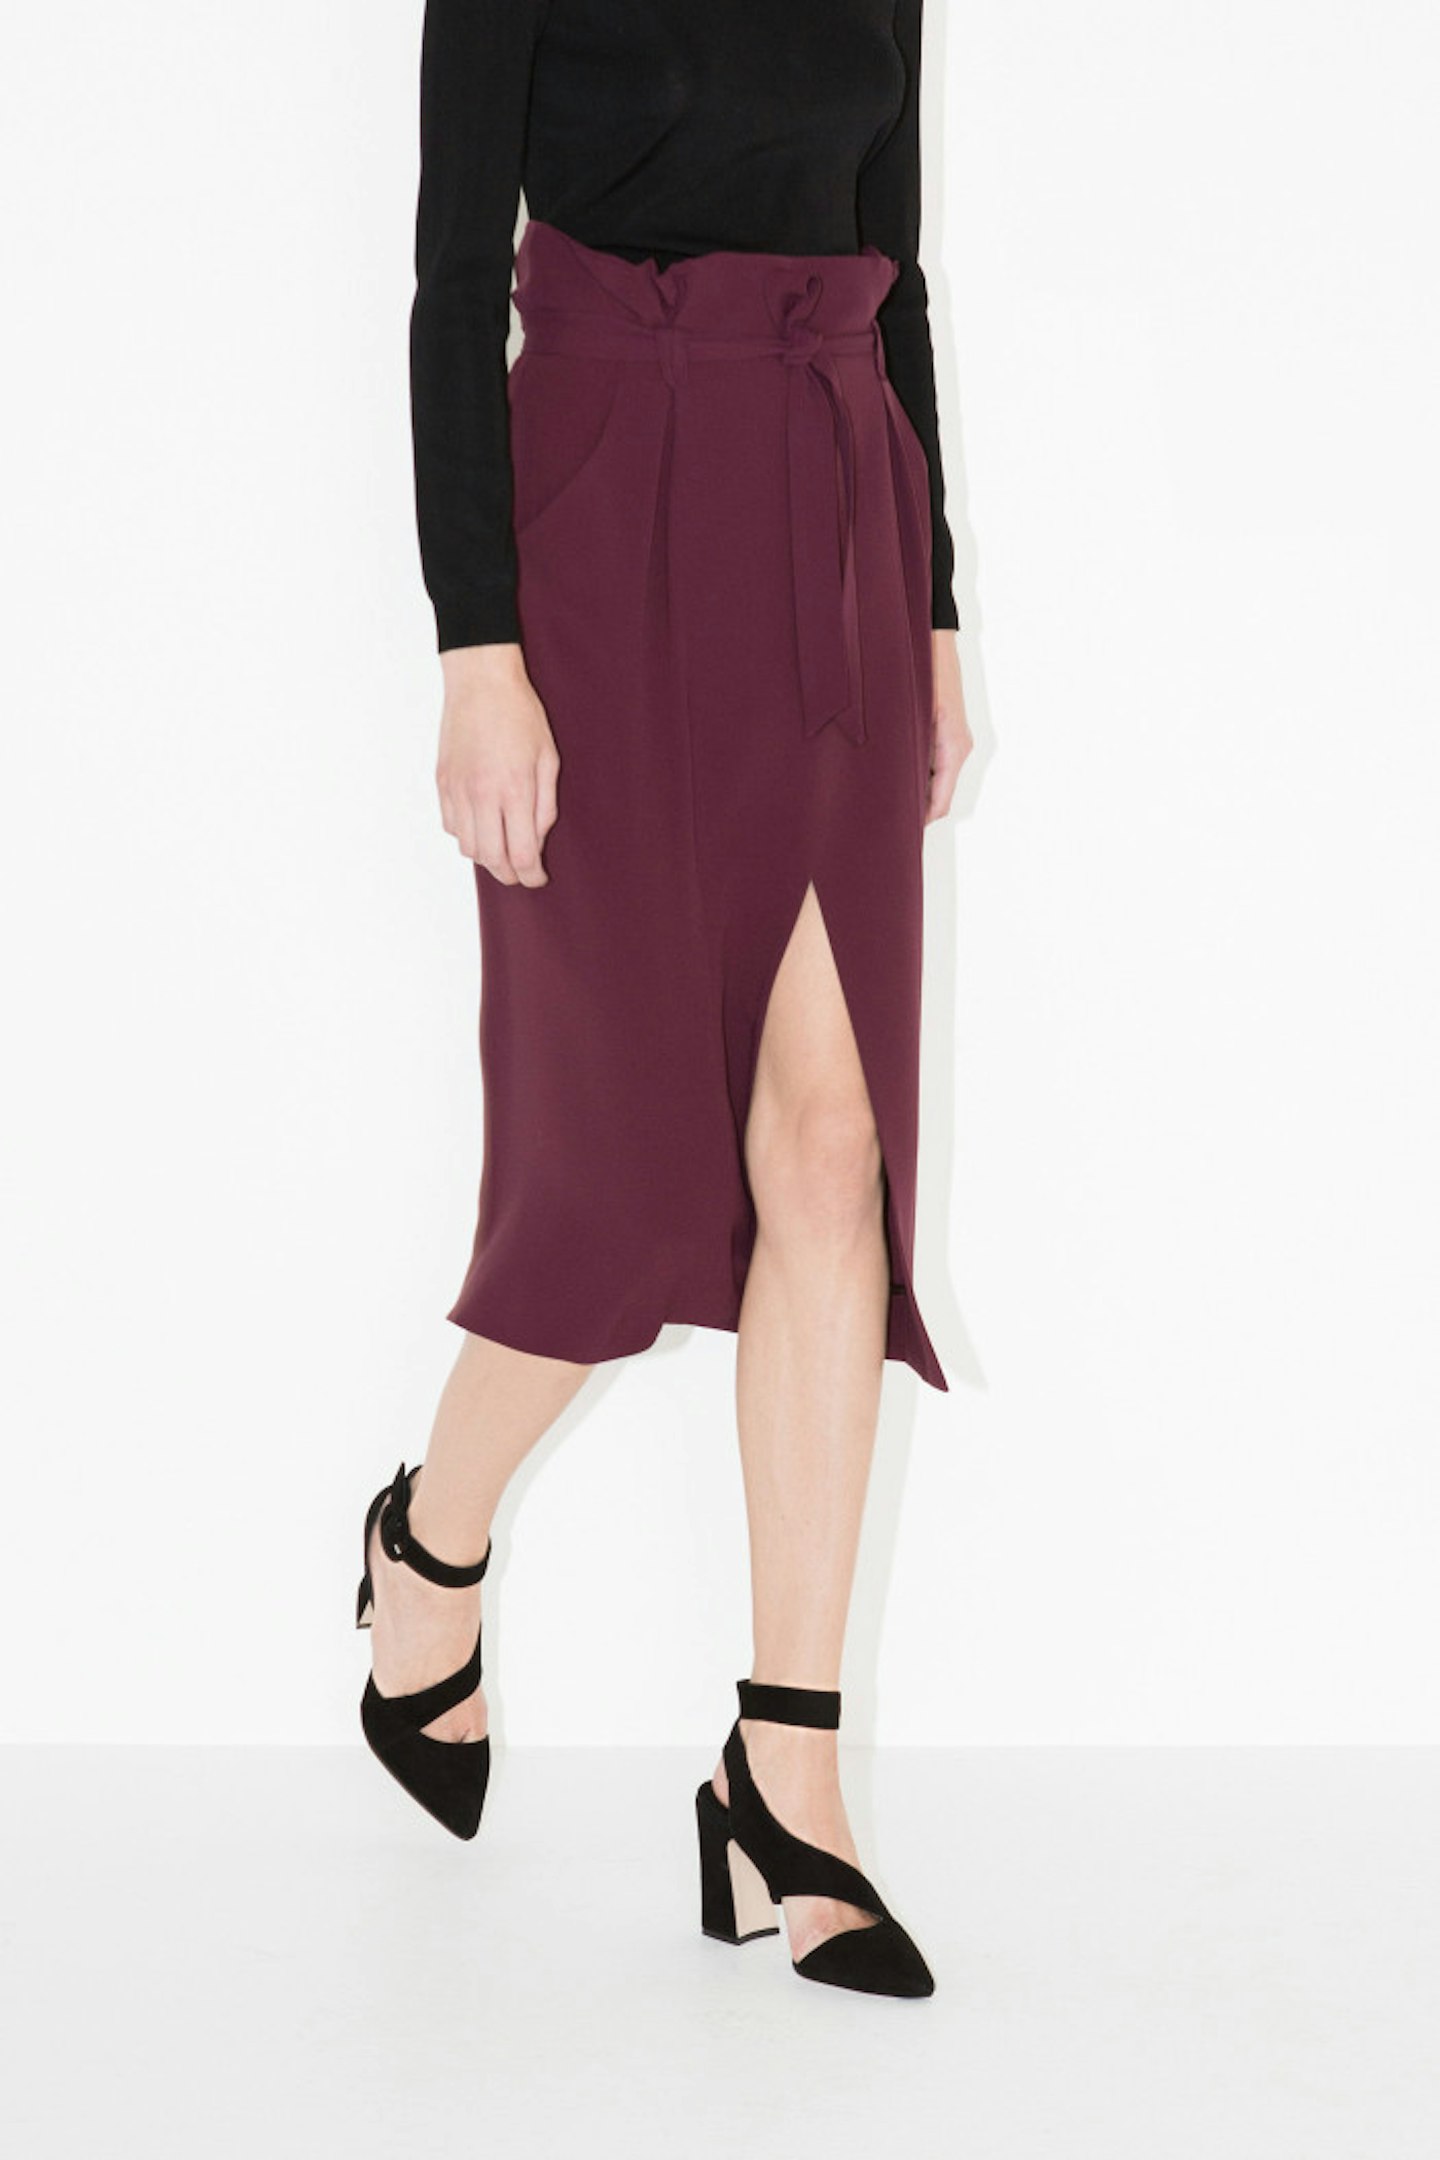 Uterque Belted Maroon Skirt, £95.00